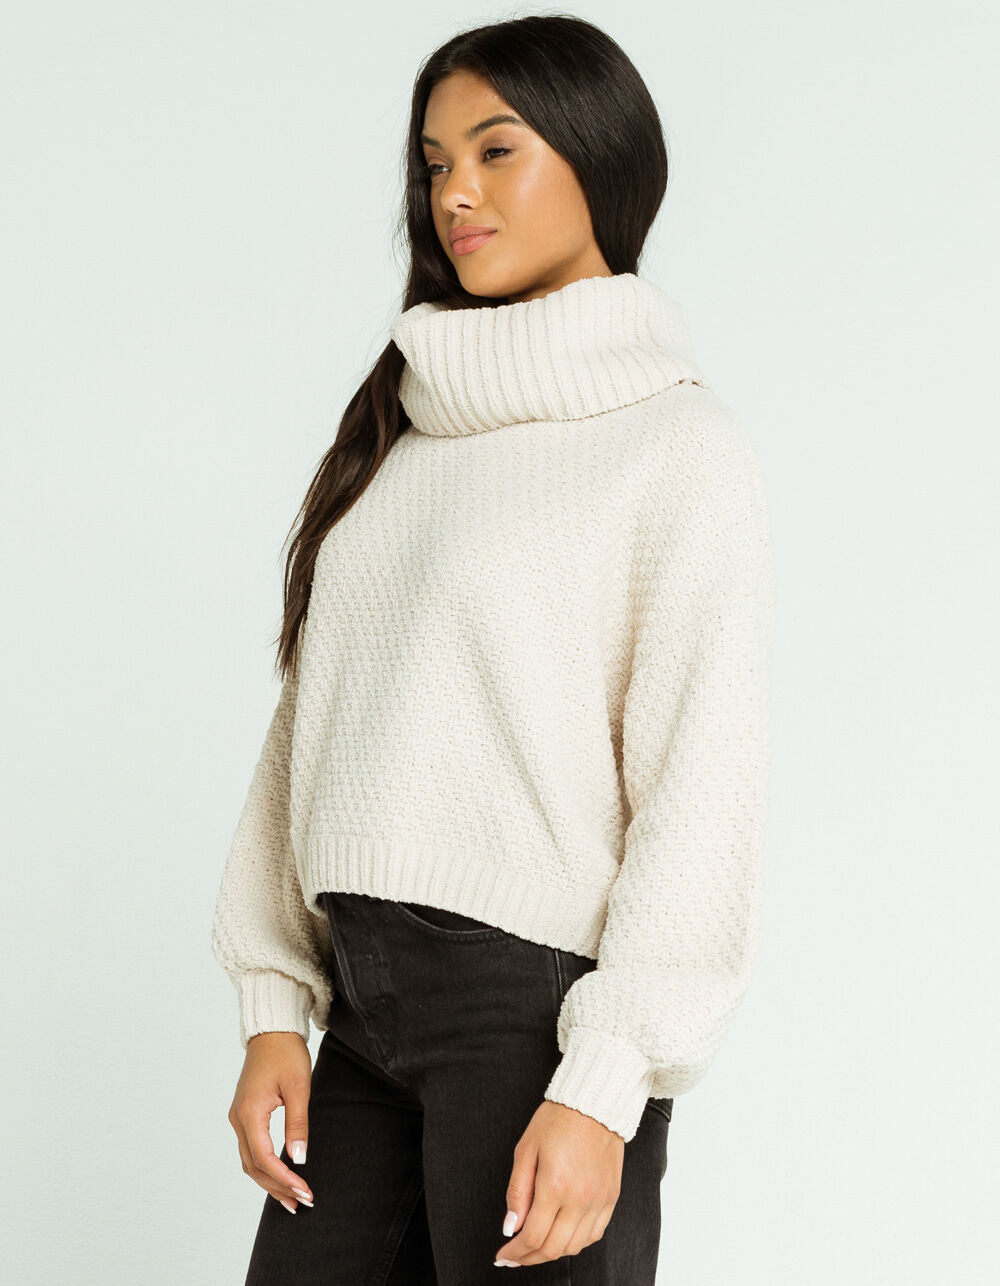 SKY AND SPARROW Chenille Cowl Neck Womens Ivory Sweater - IVORY | Tillys